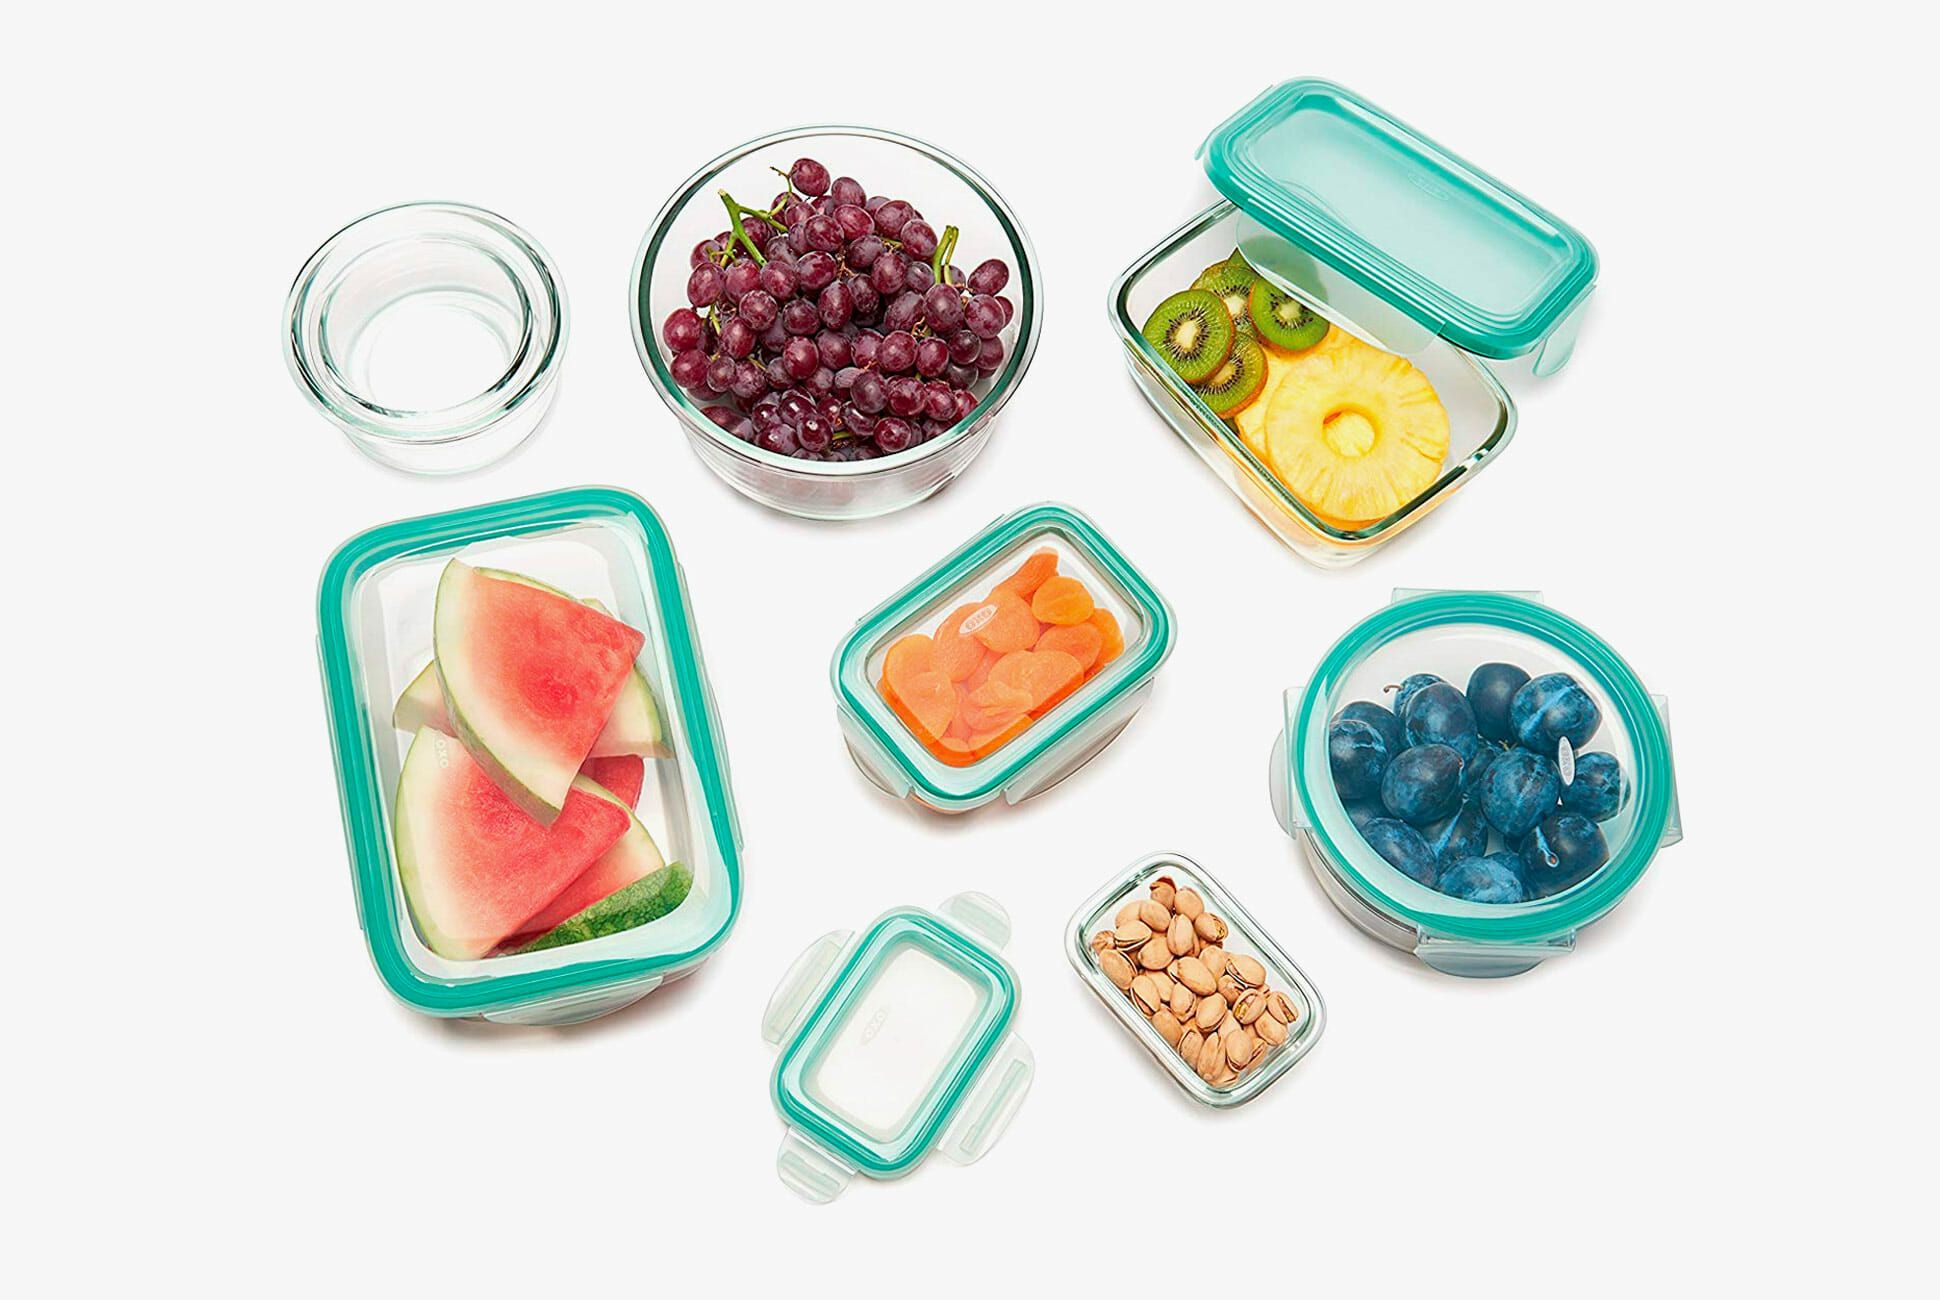 Meal Prep Essentials: What You Really Need